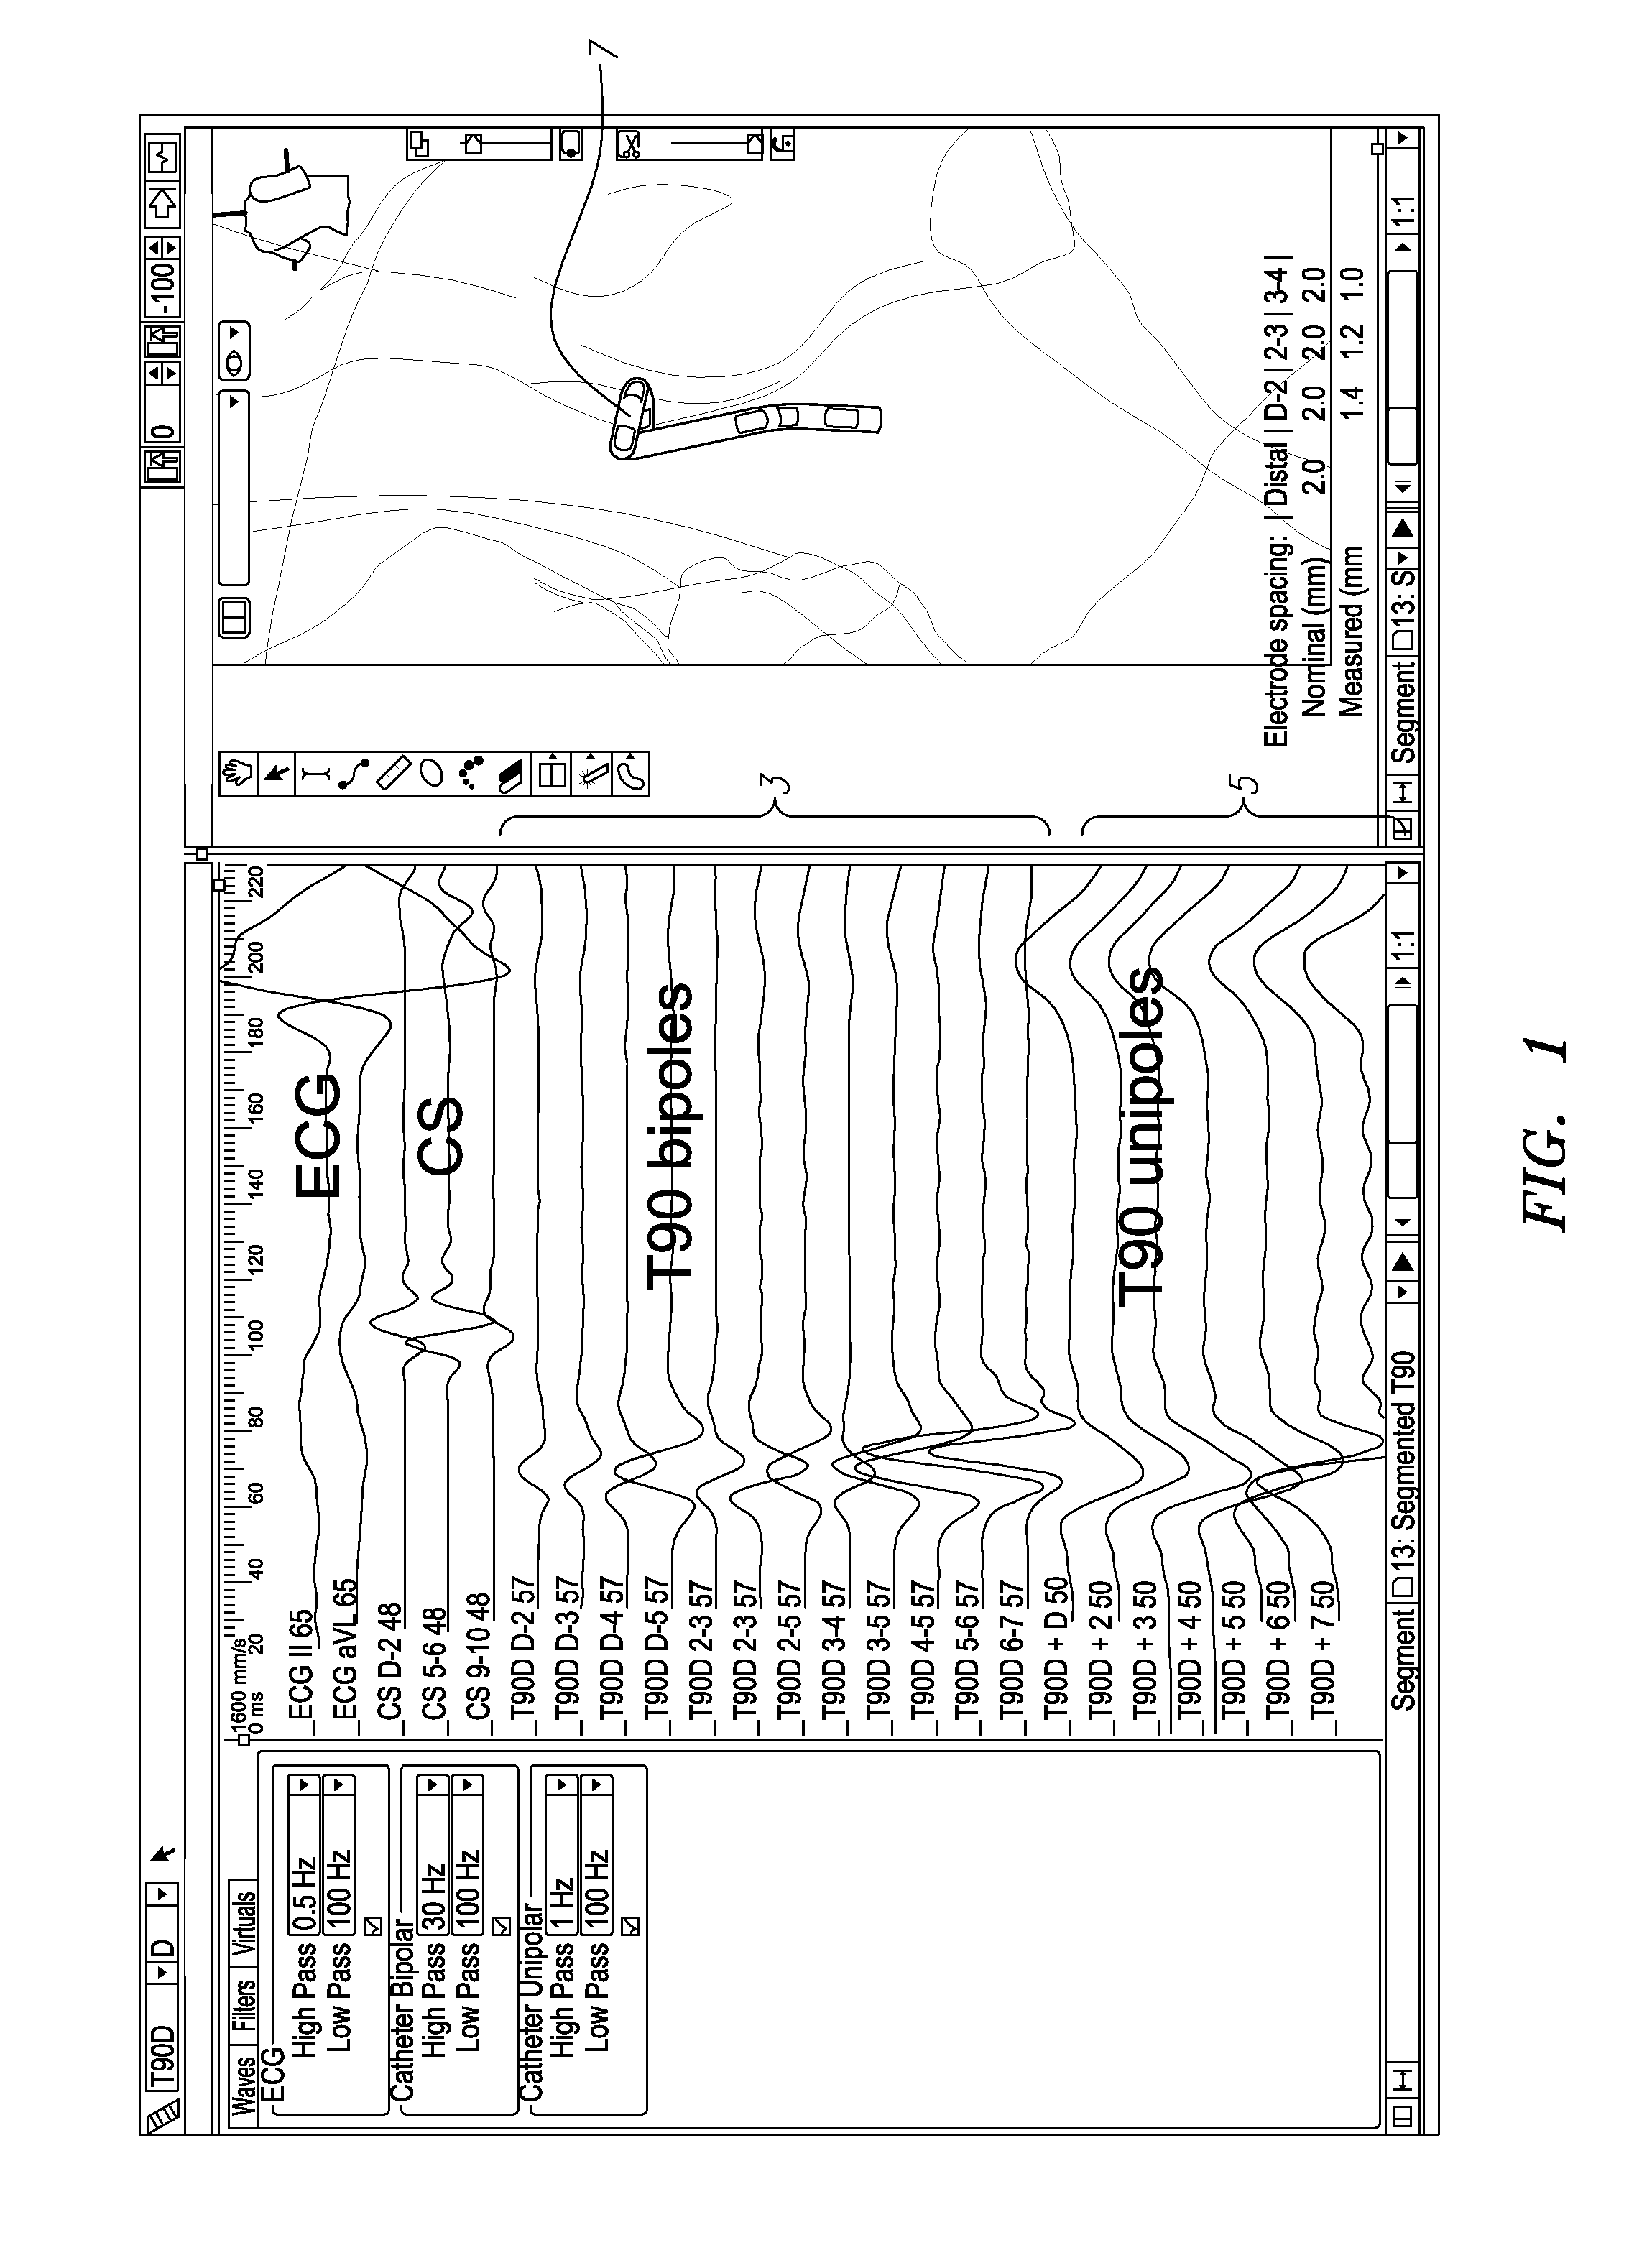 Systems and methods for using electrophysiology properties for classifying arrhythmia sources